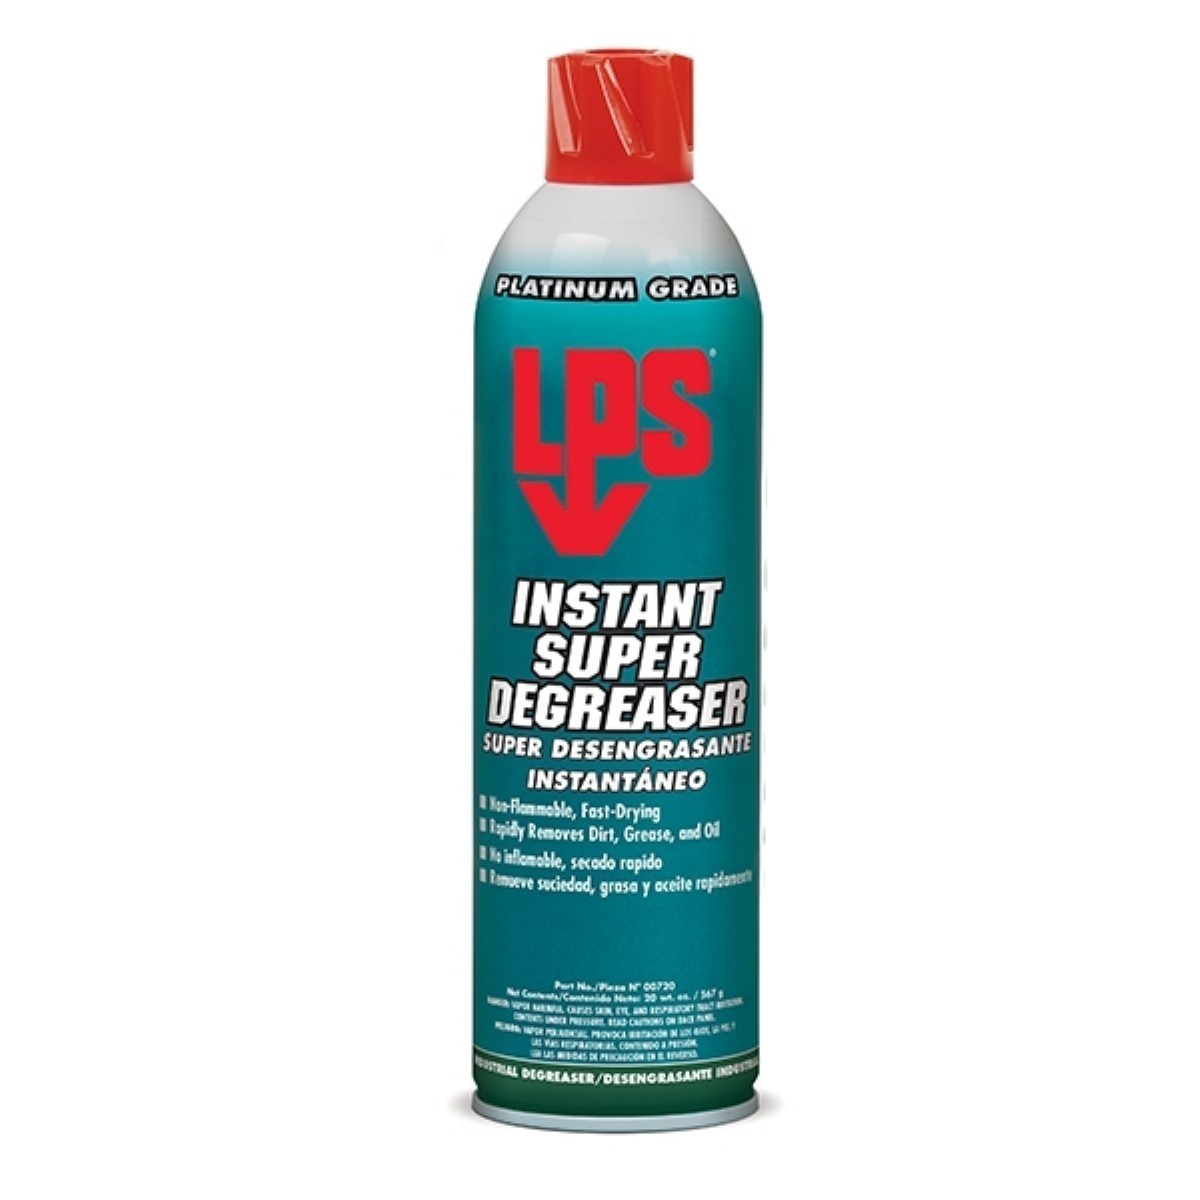 LPS GROUPS | LPS INSTANT SUPER DEGREASER | 4004 | aircraft, aircraft, ams, ardrox, chemetal, imcaero, surf chemistry, spray, solvent, cleaner, instant-super-degreaser  | 